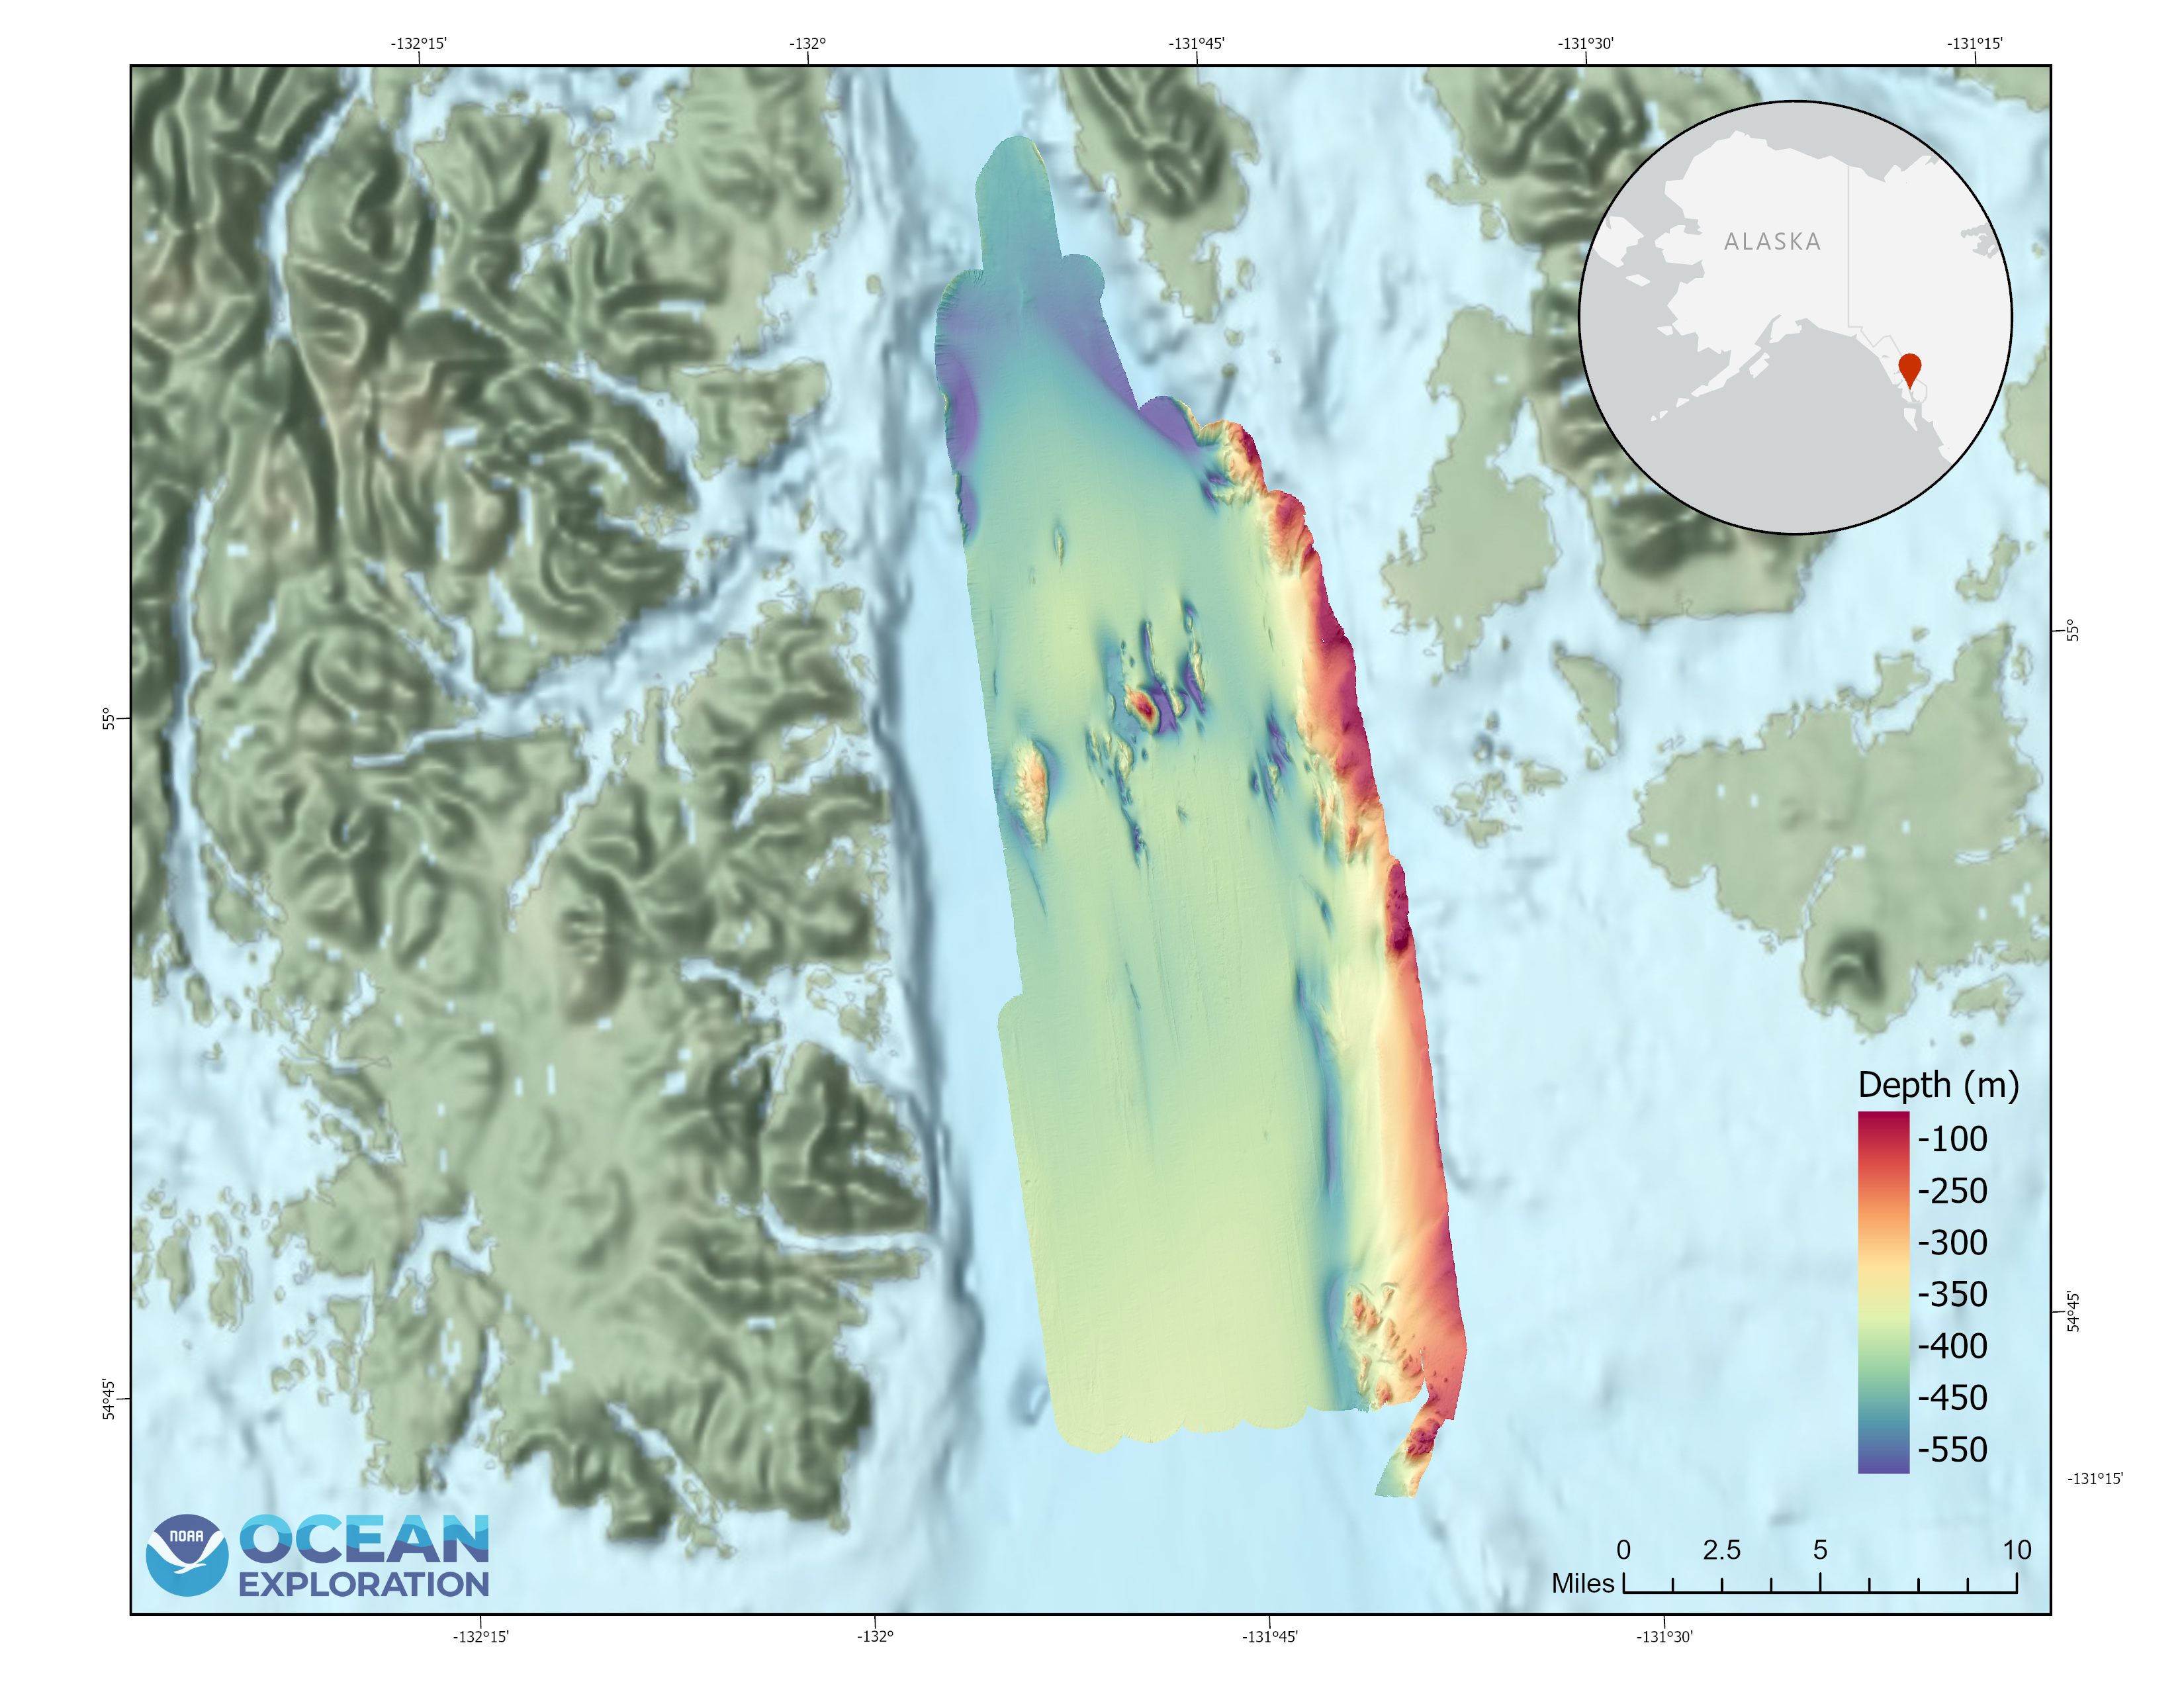 Bathymetric map produced from multibeam sonar data collected from NOAA Ship Okeanos Explorer during the Seascape Alaska 6 expedition with over 100 million soundings.